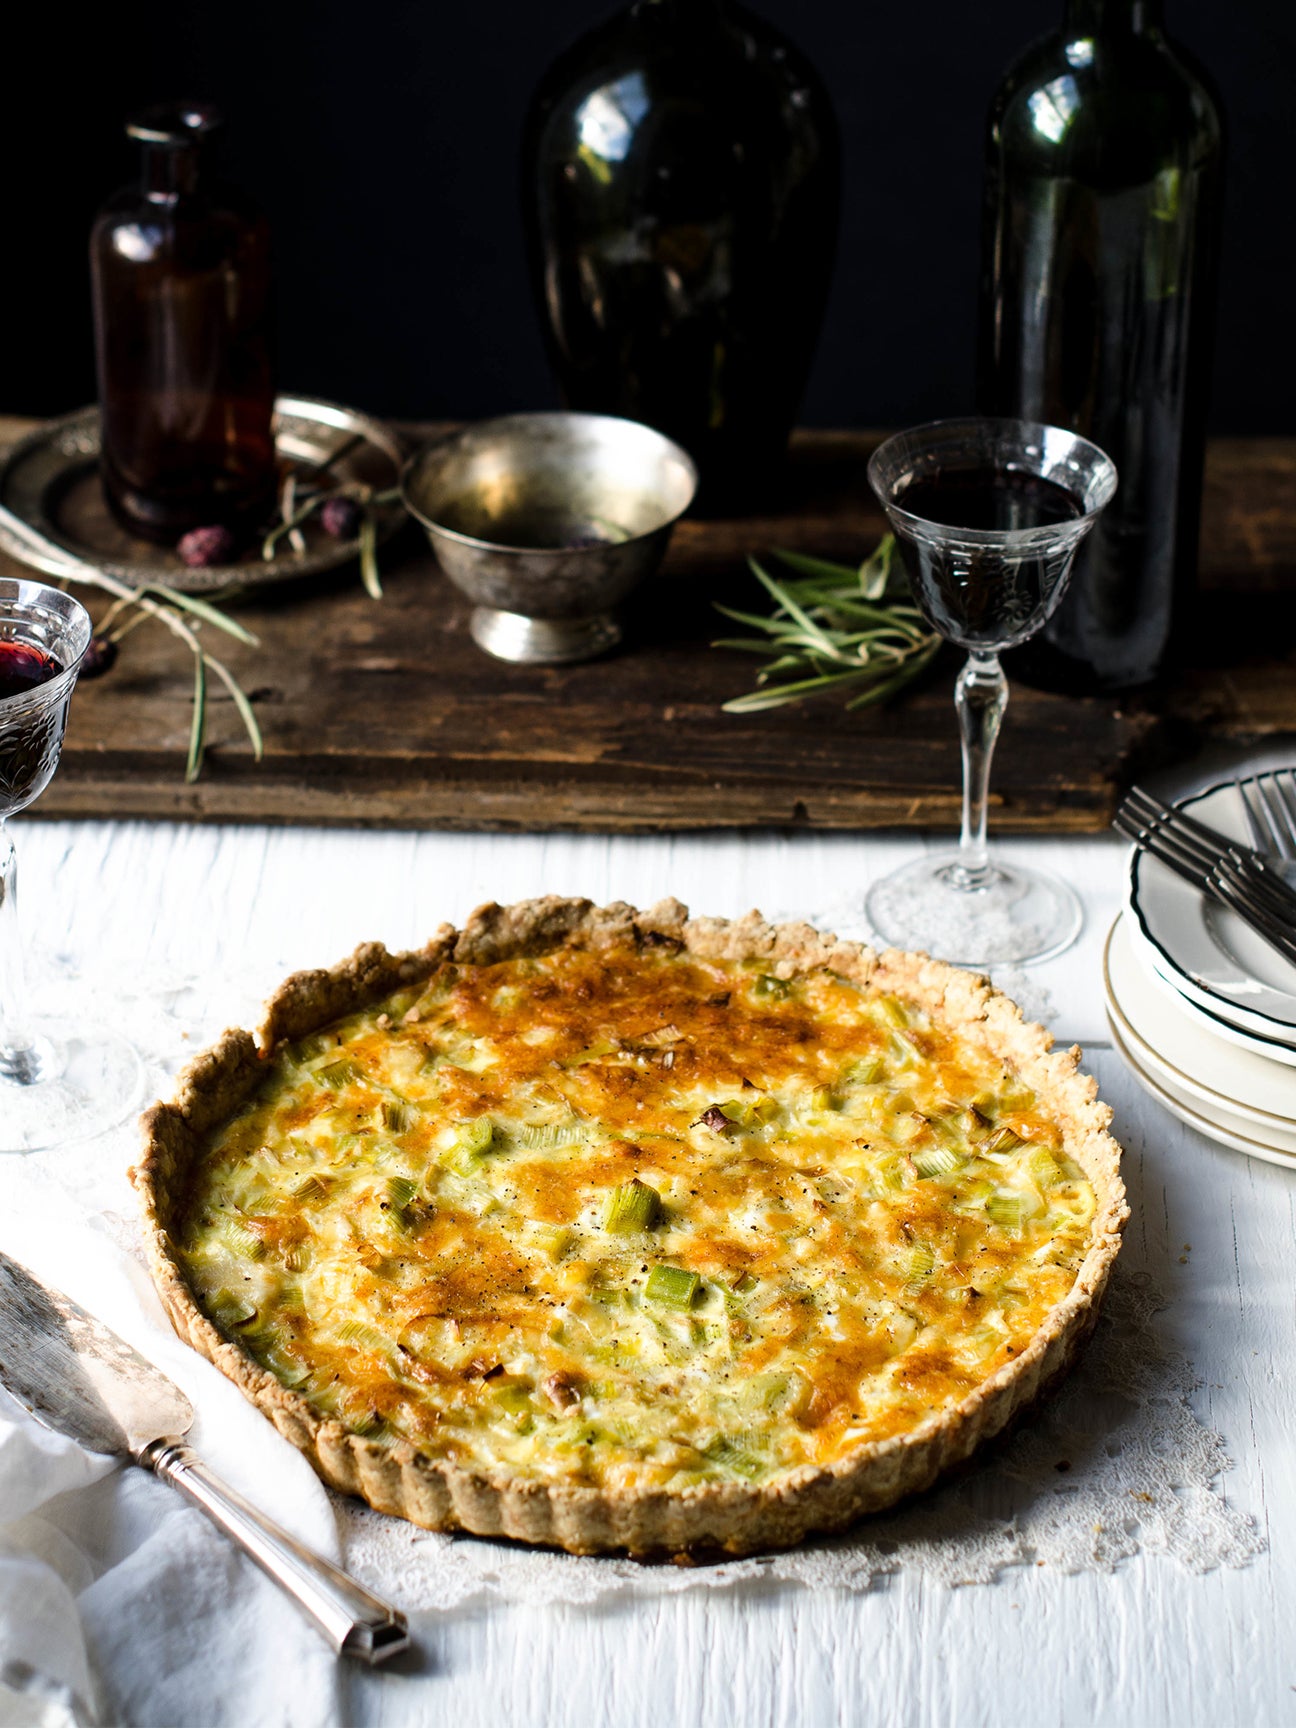 gruyere and leek quiche with wine glasses